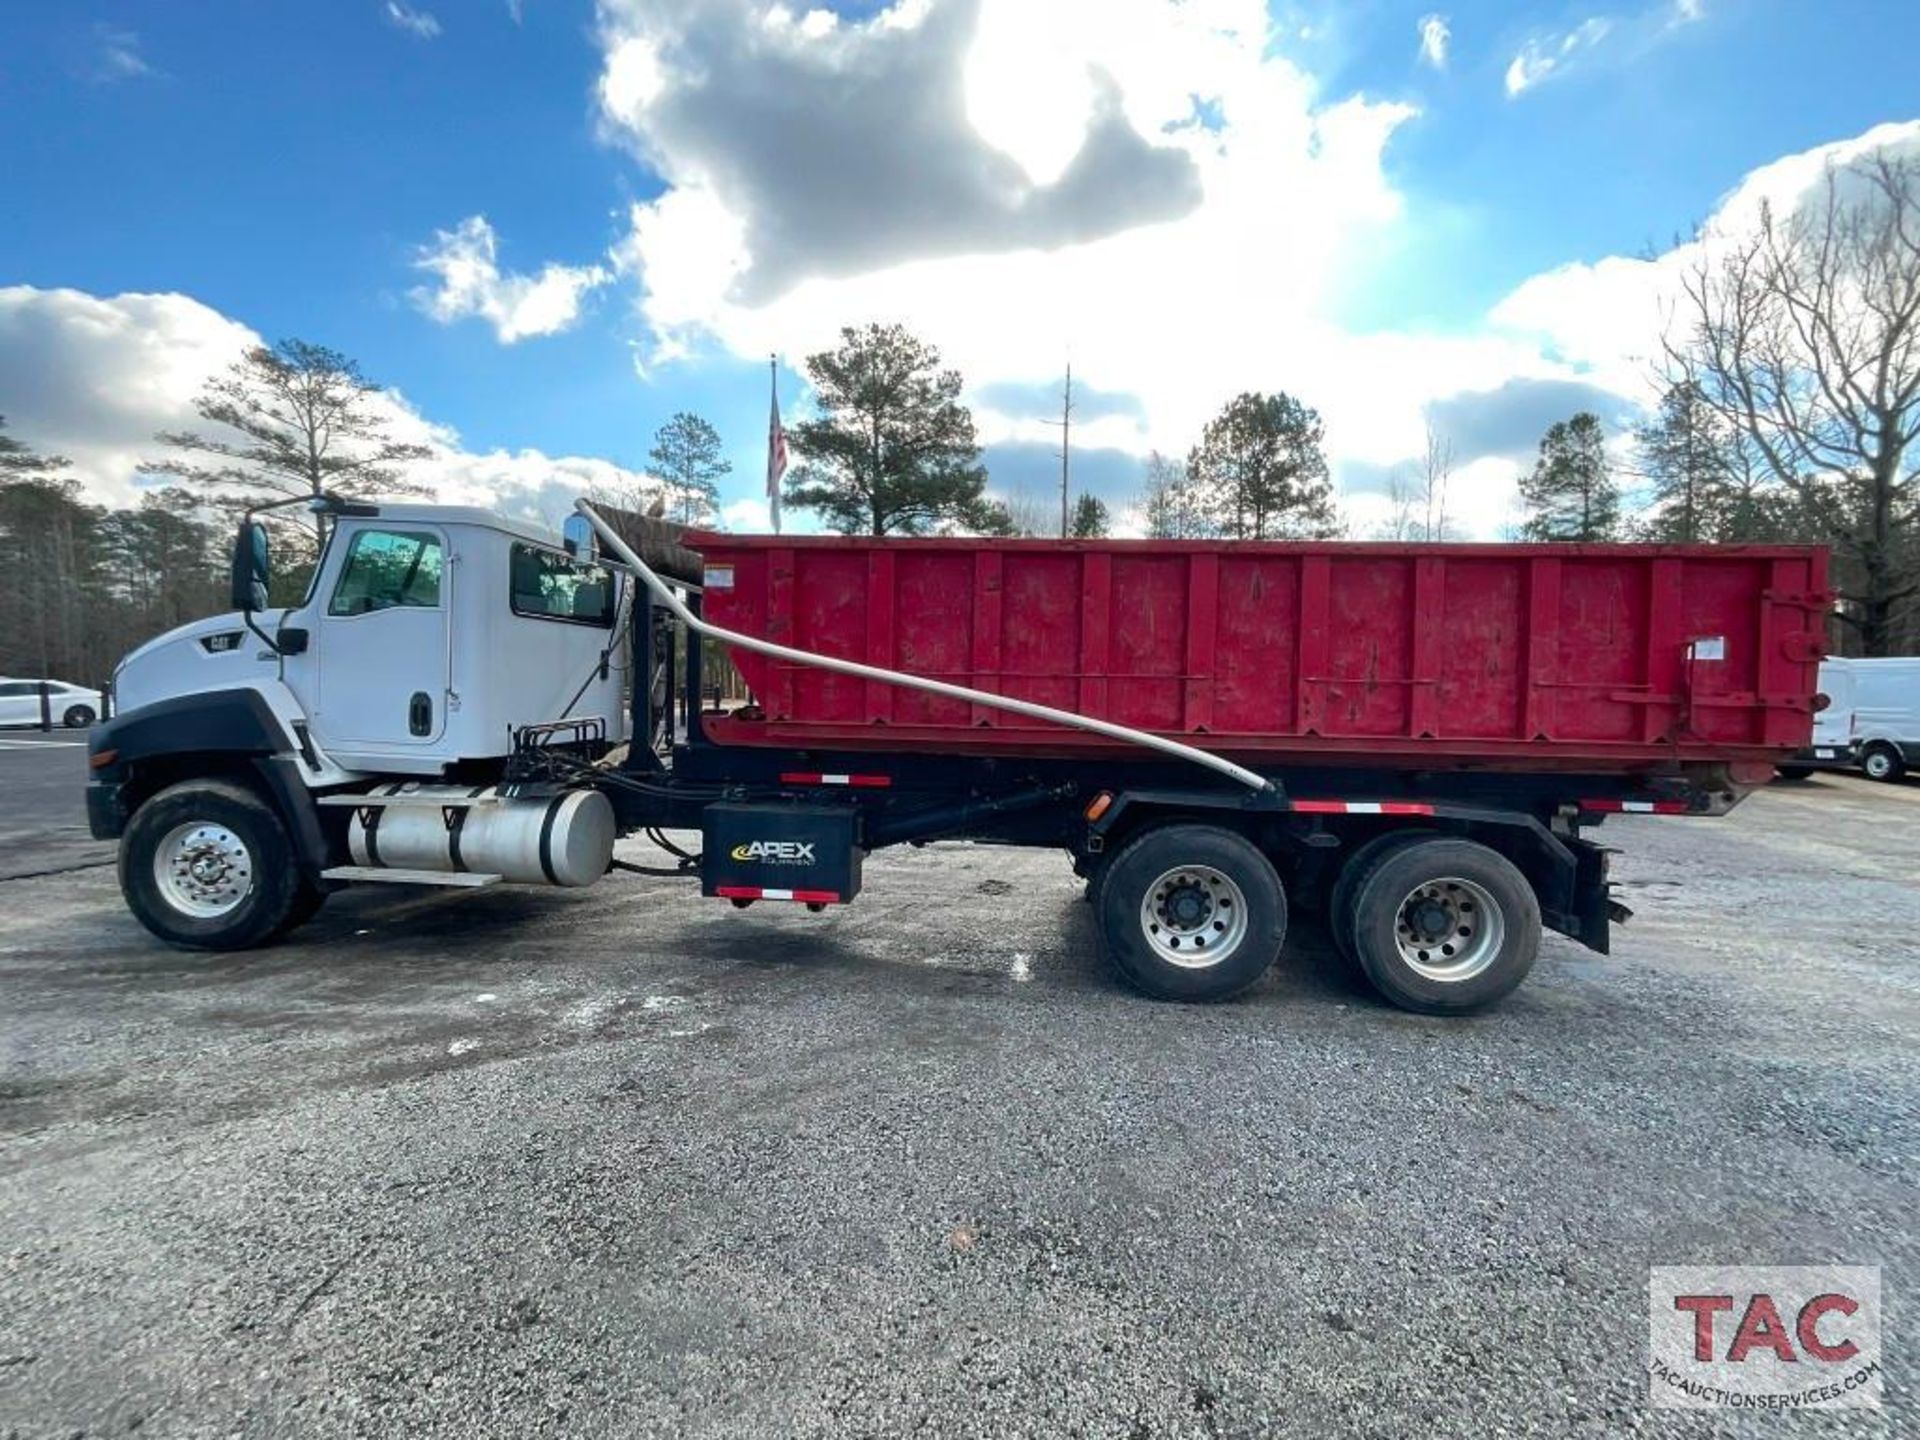 2012 CAT CT660S Roll-Off Truck W/ 20yd Dumpster - Image 11 of 148